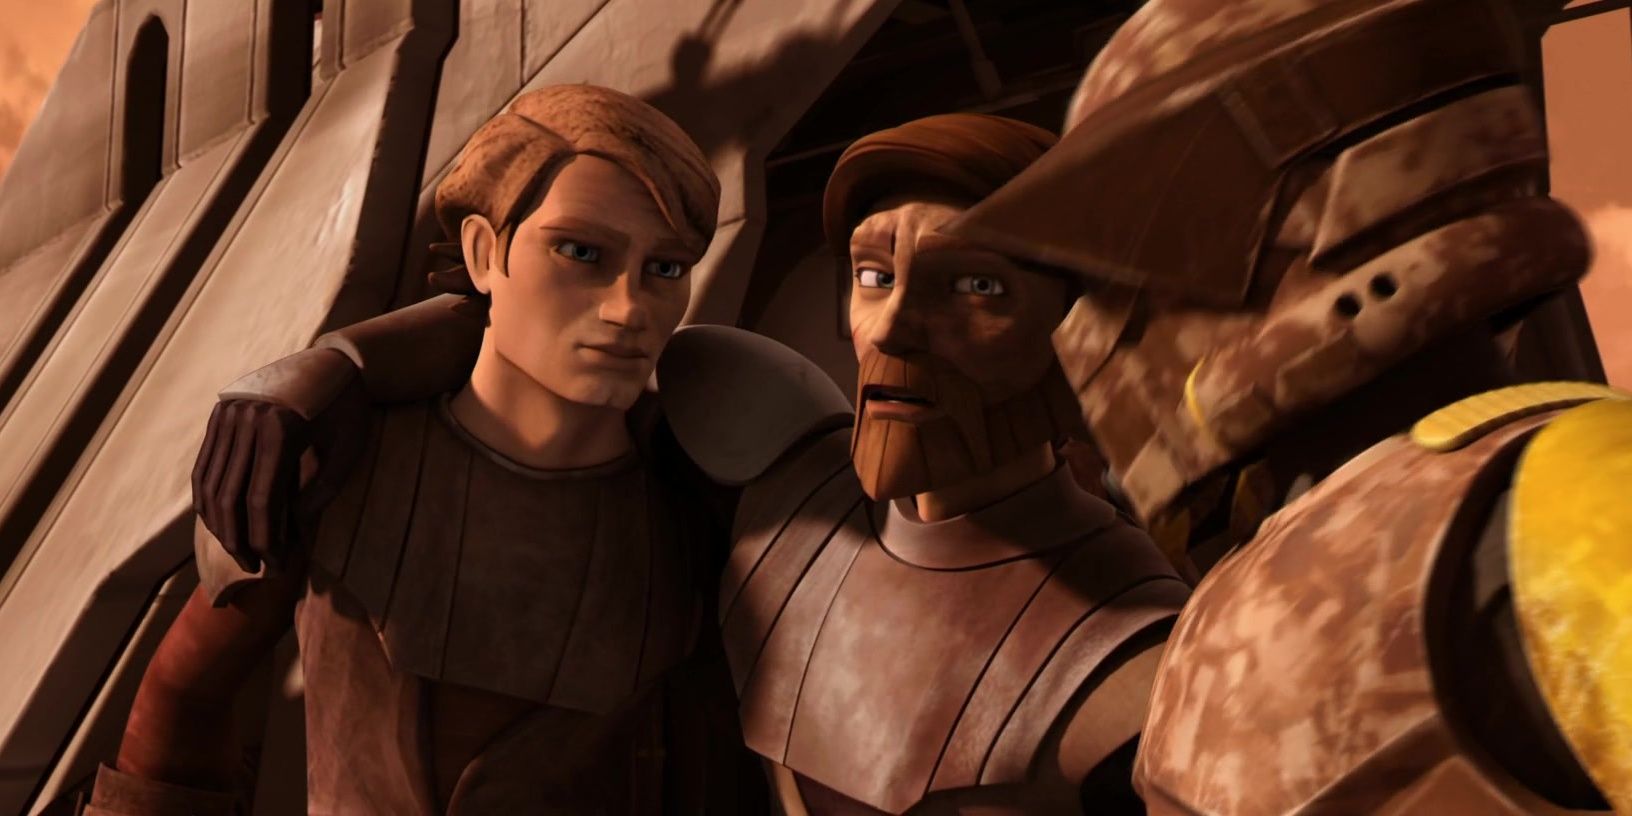 An injured Obi-Wan is assisted by Anakin Skywalker and Clone Sinker. His face is dirty and pained.